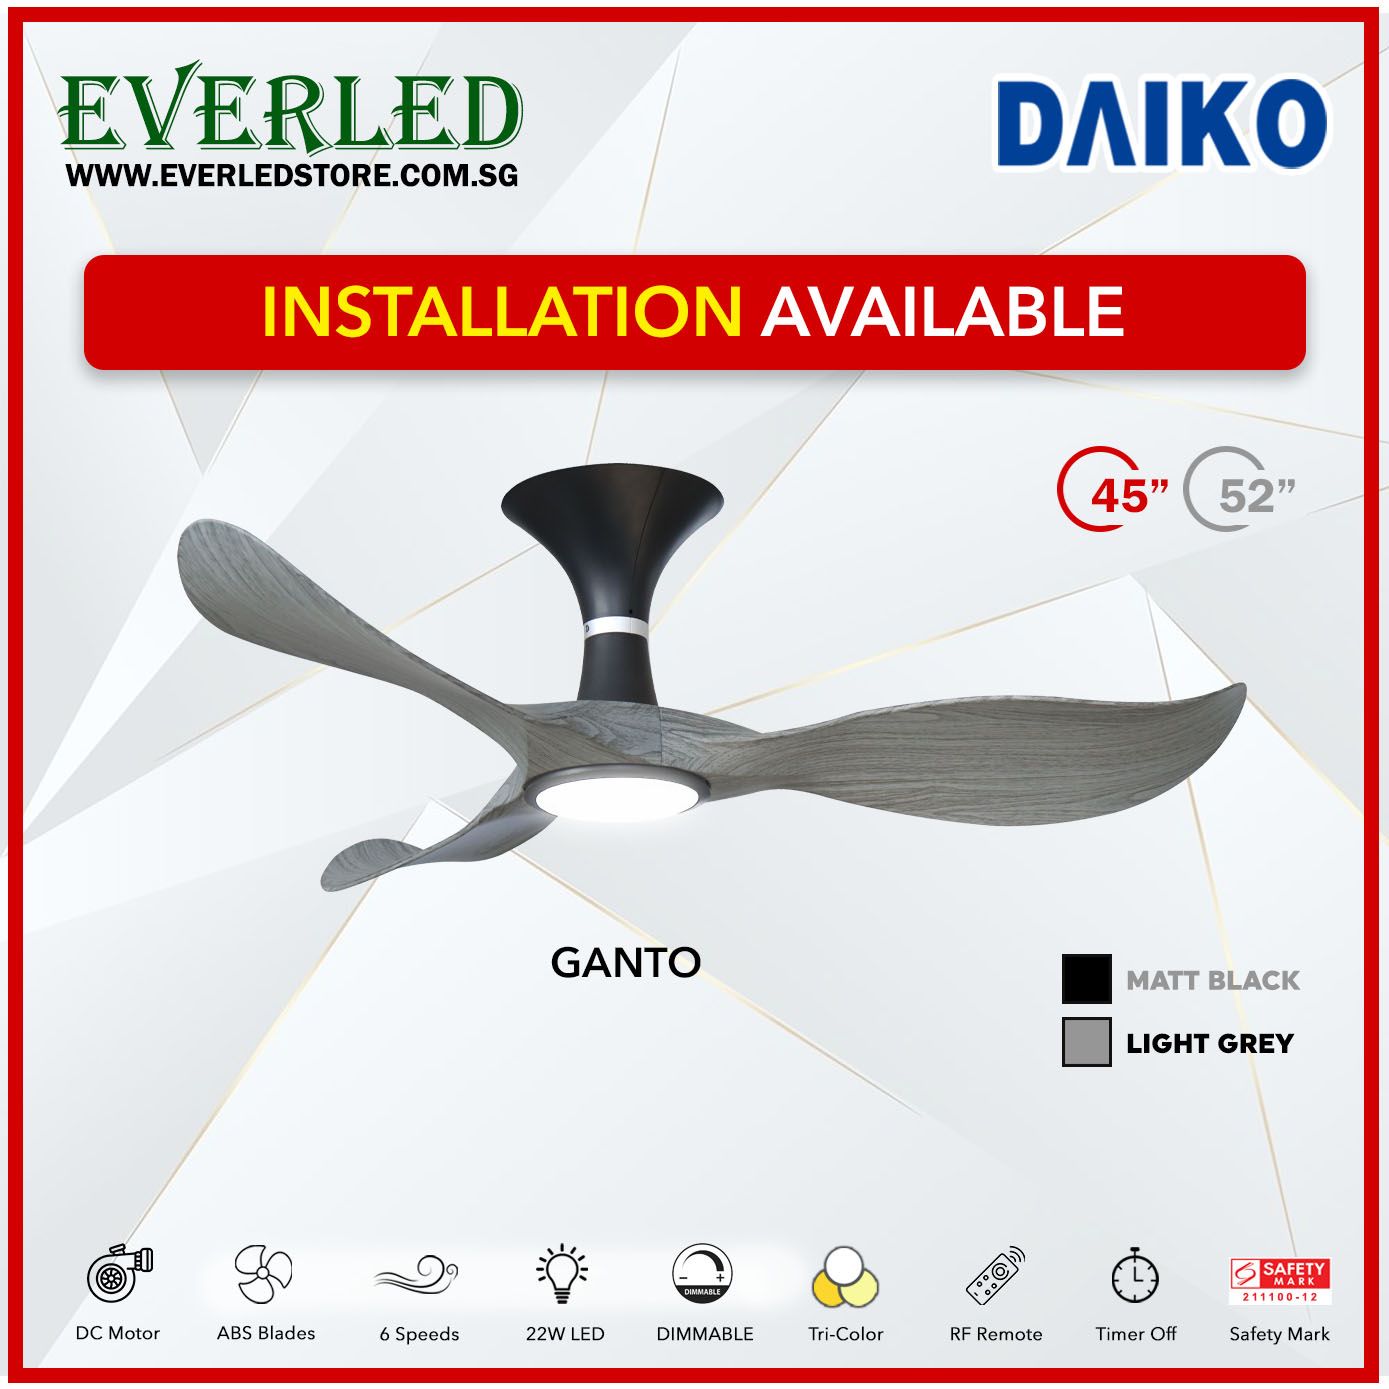 Daiko DC Ganto 45"/52" with Dimmable Tri-color LED (Inverter DC Fan)